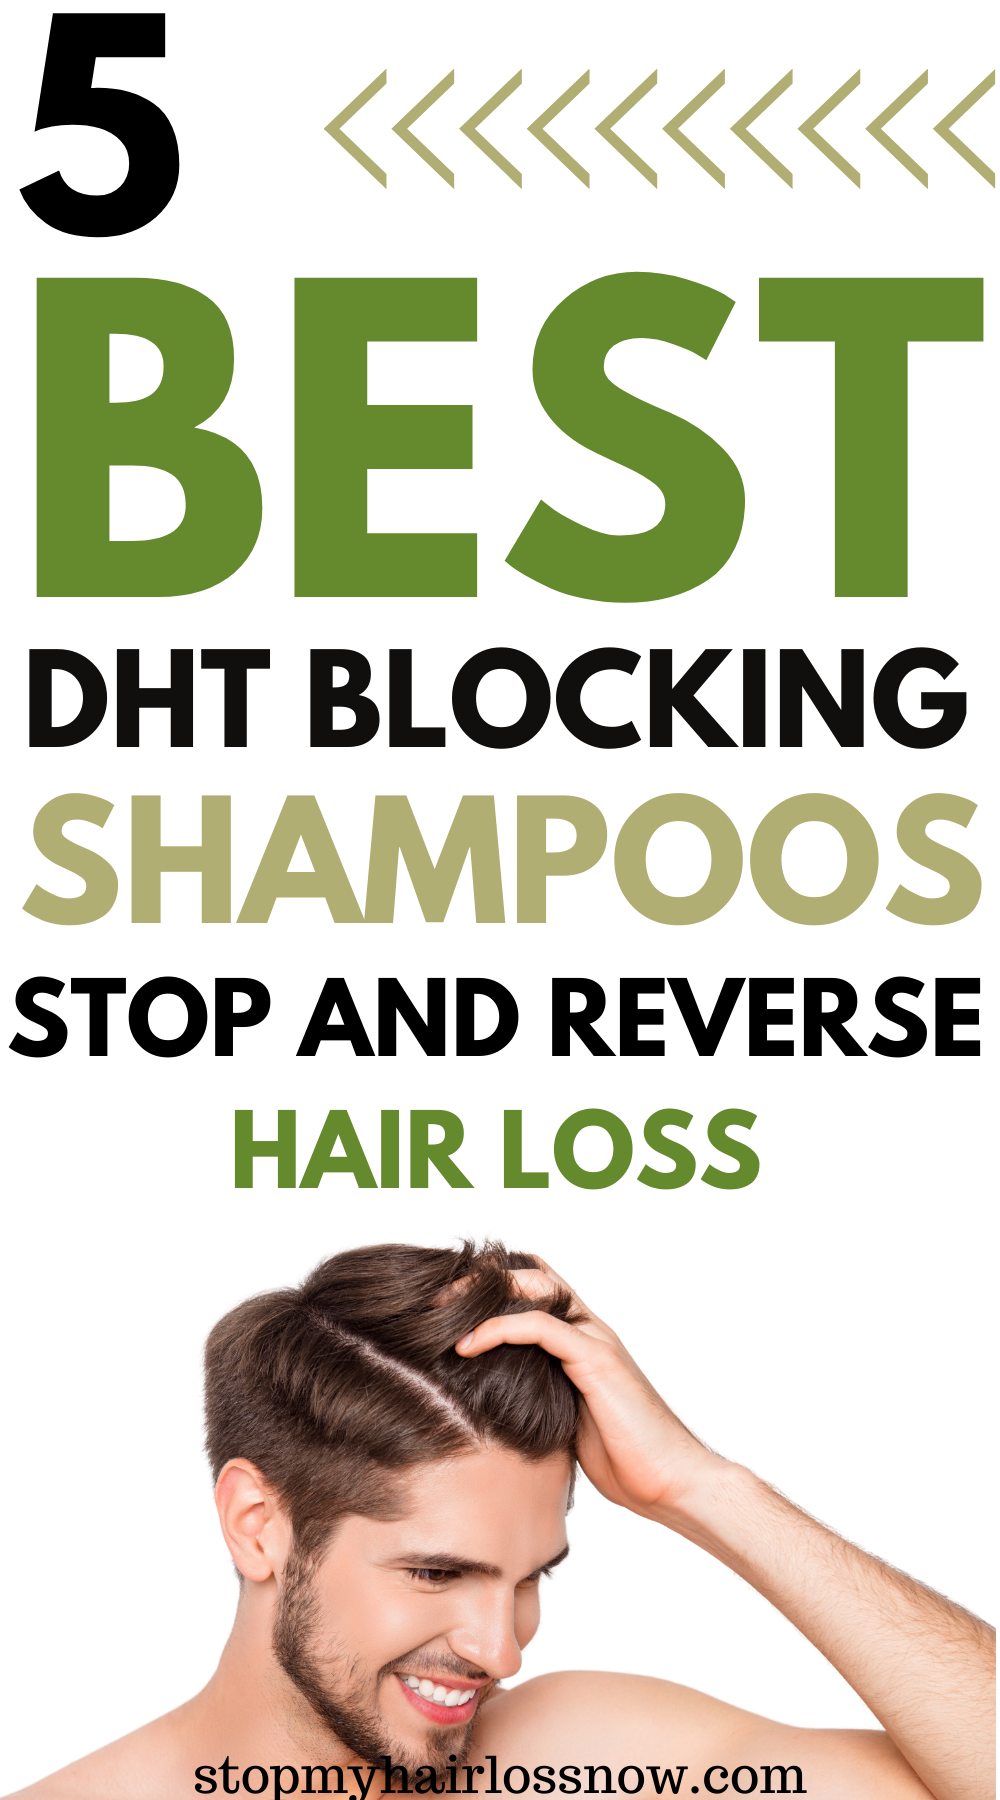 5 Best DHT Blocking Shampoos in 2021